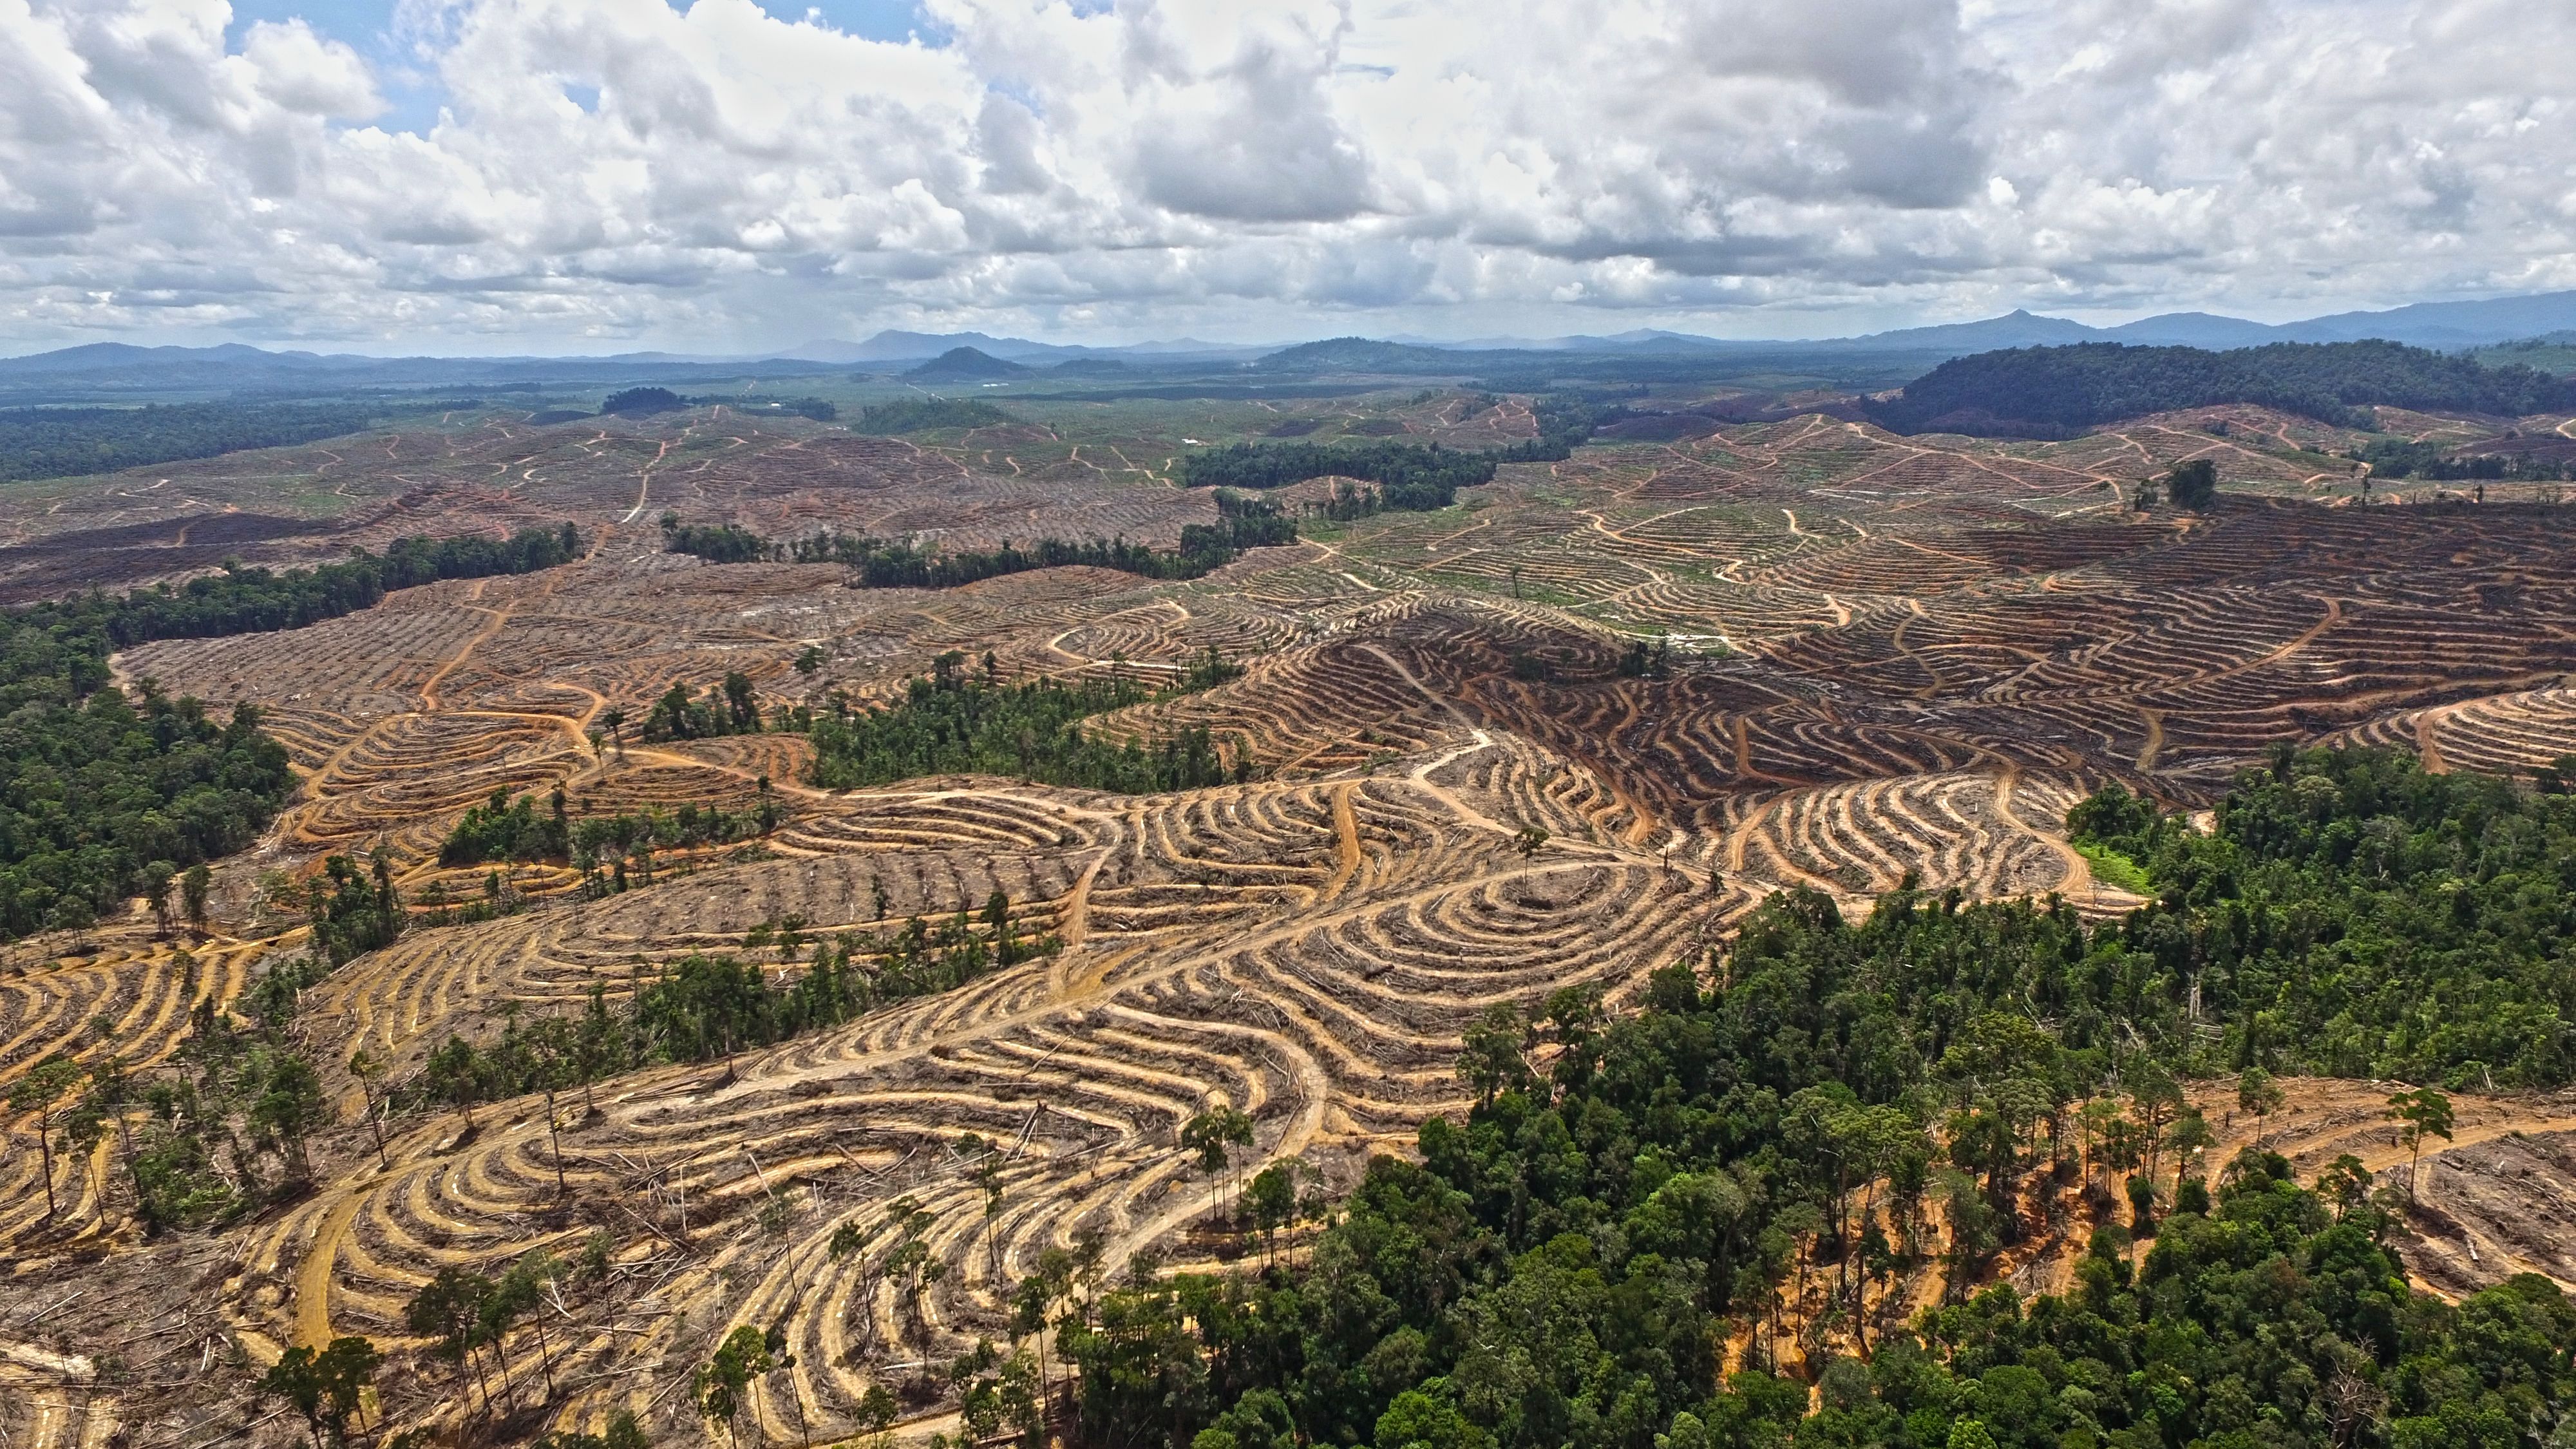 Cleared land in central Kalimantan, Indonesia, 2019